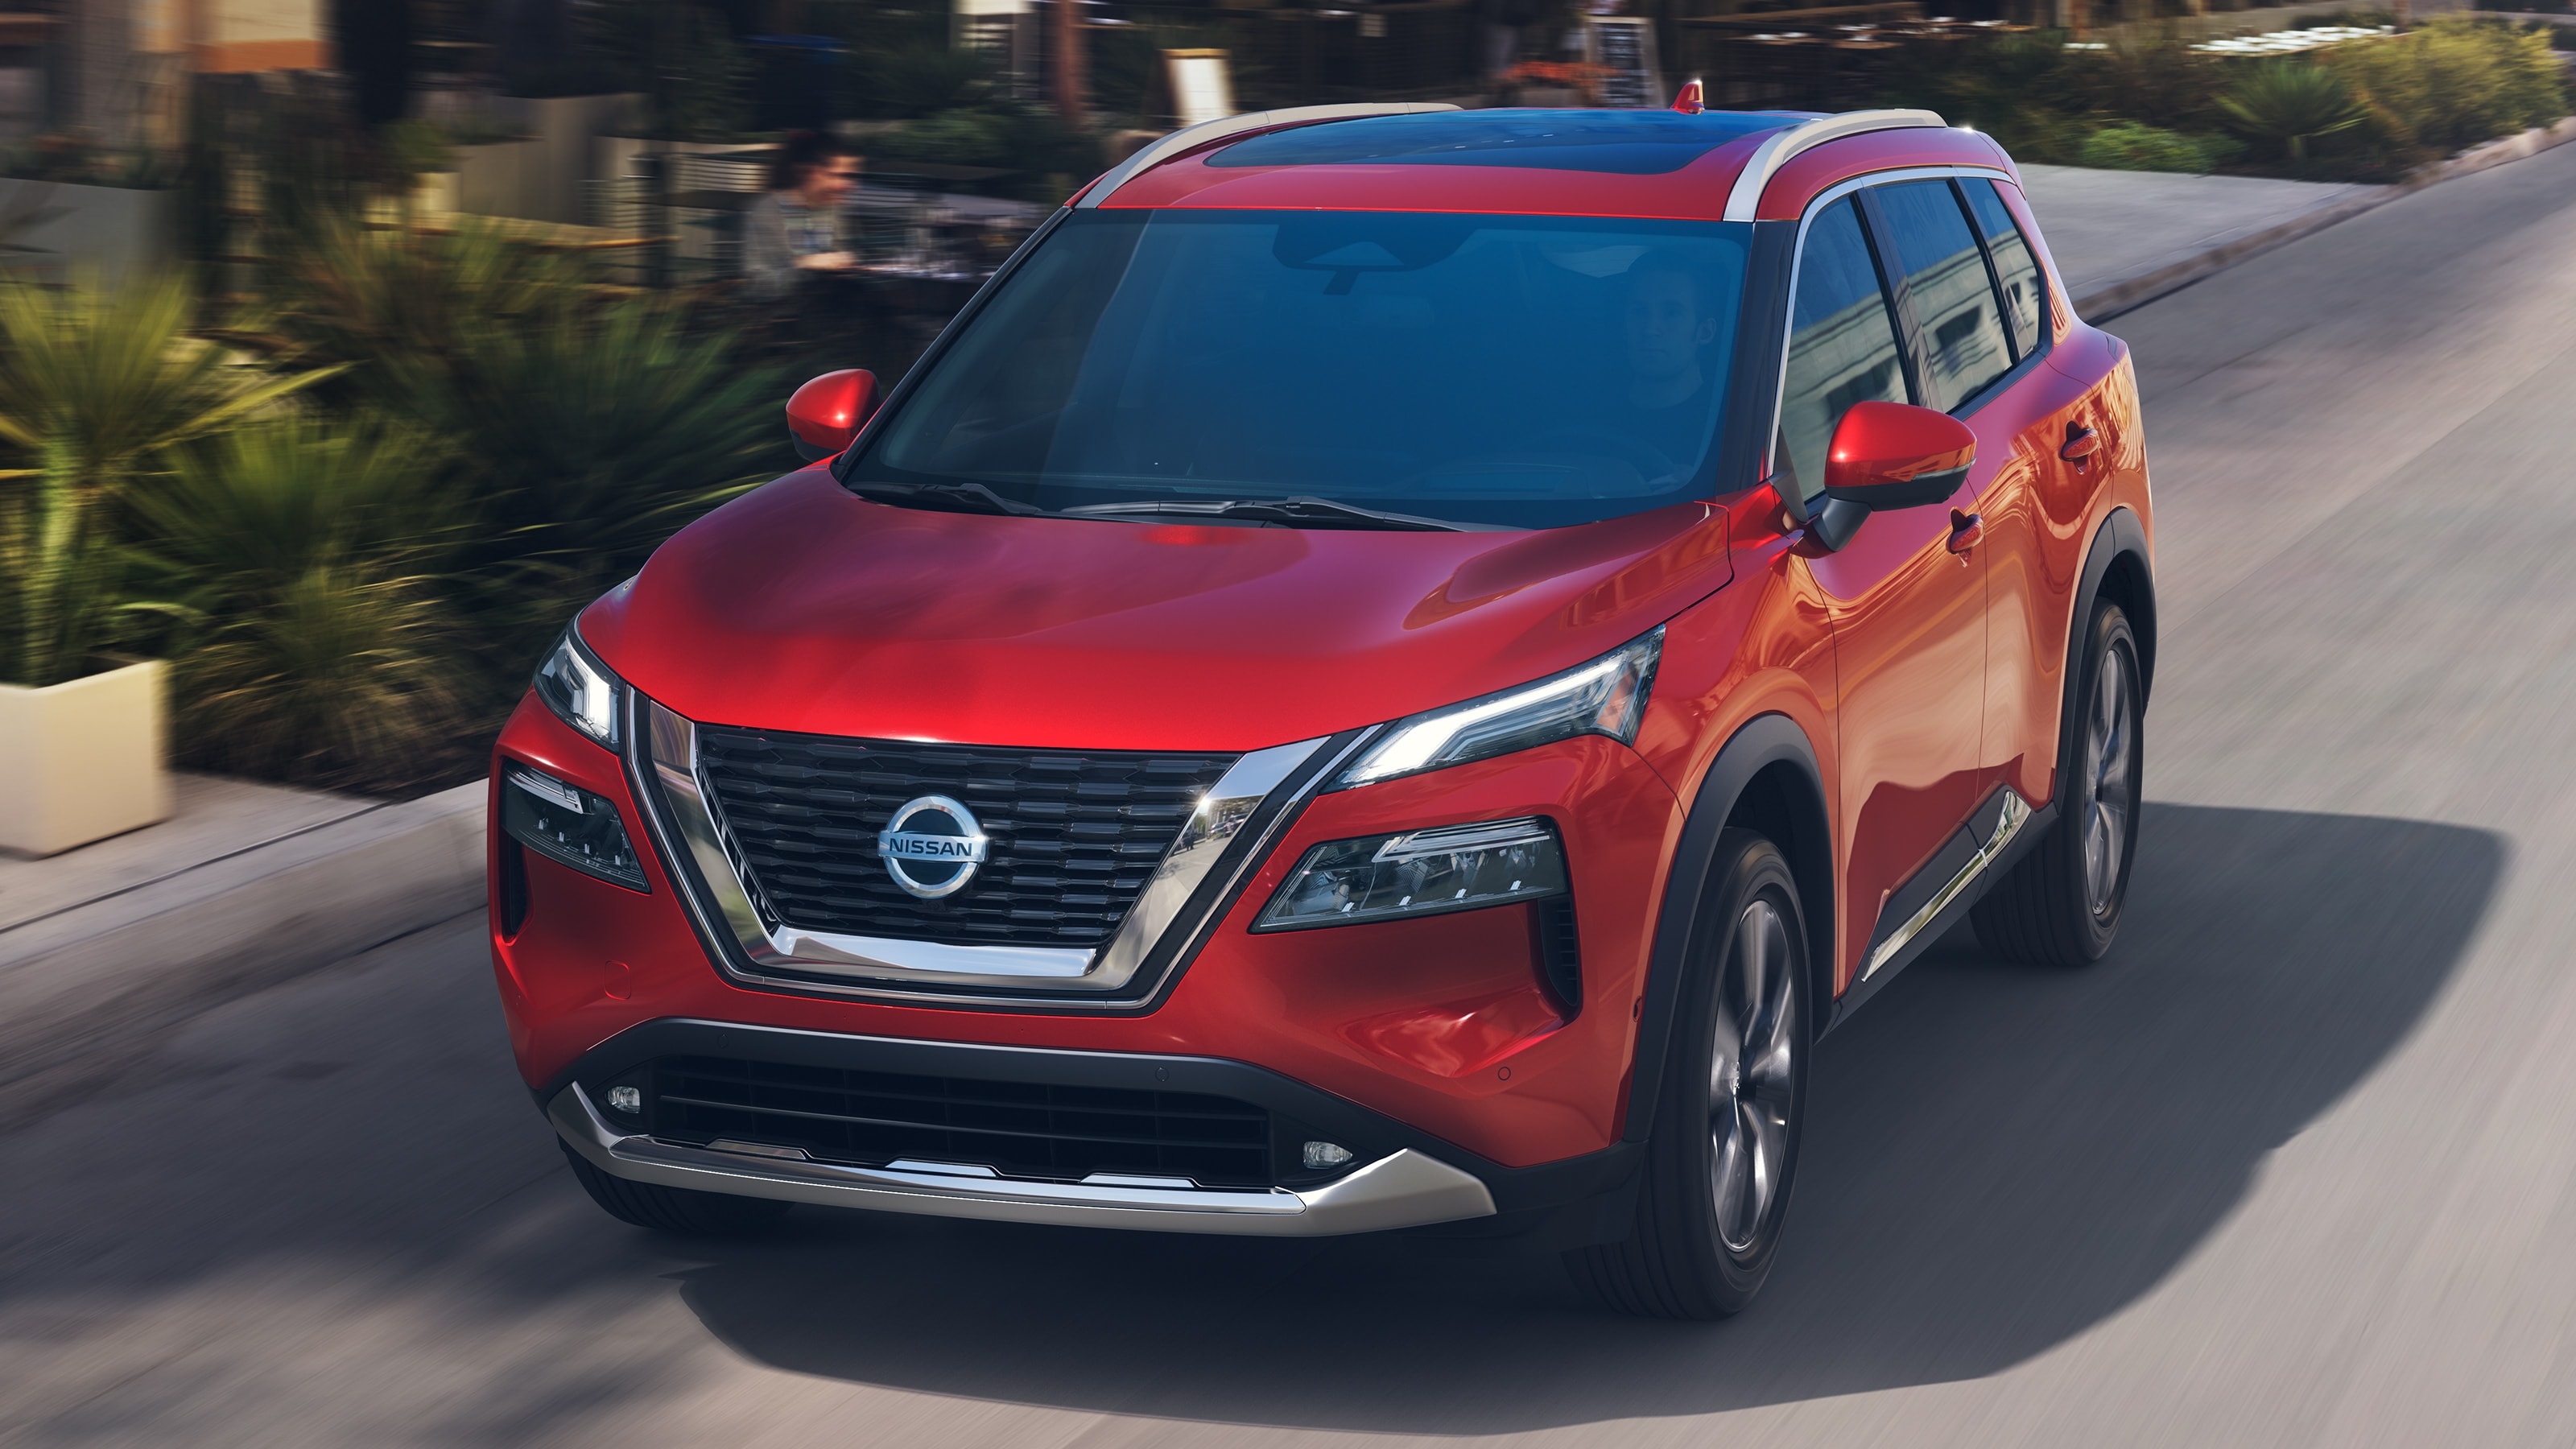 2021 Nissan Rogue exterior front driving in city